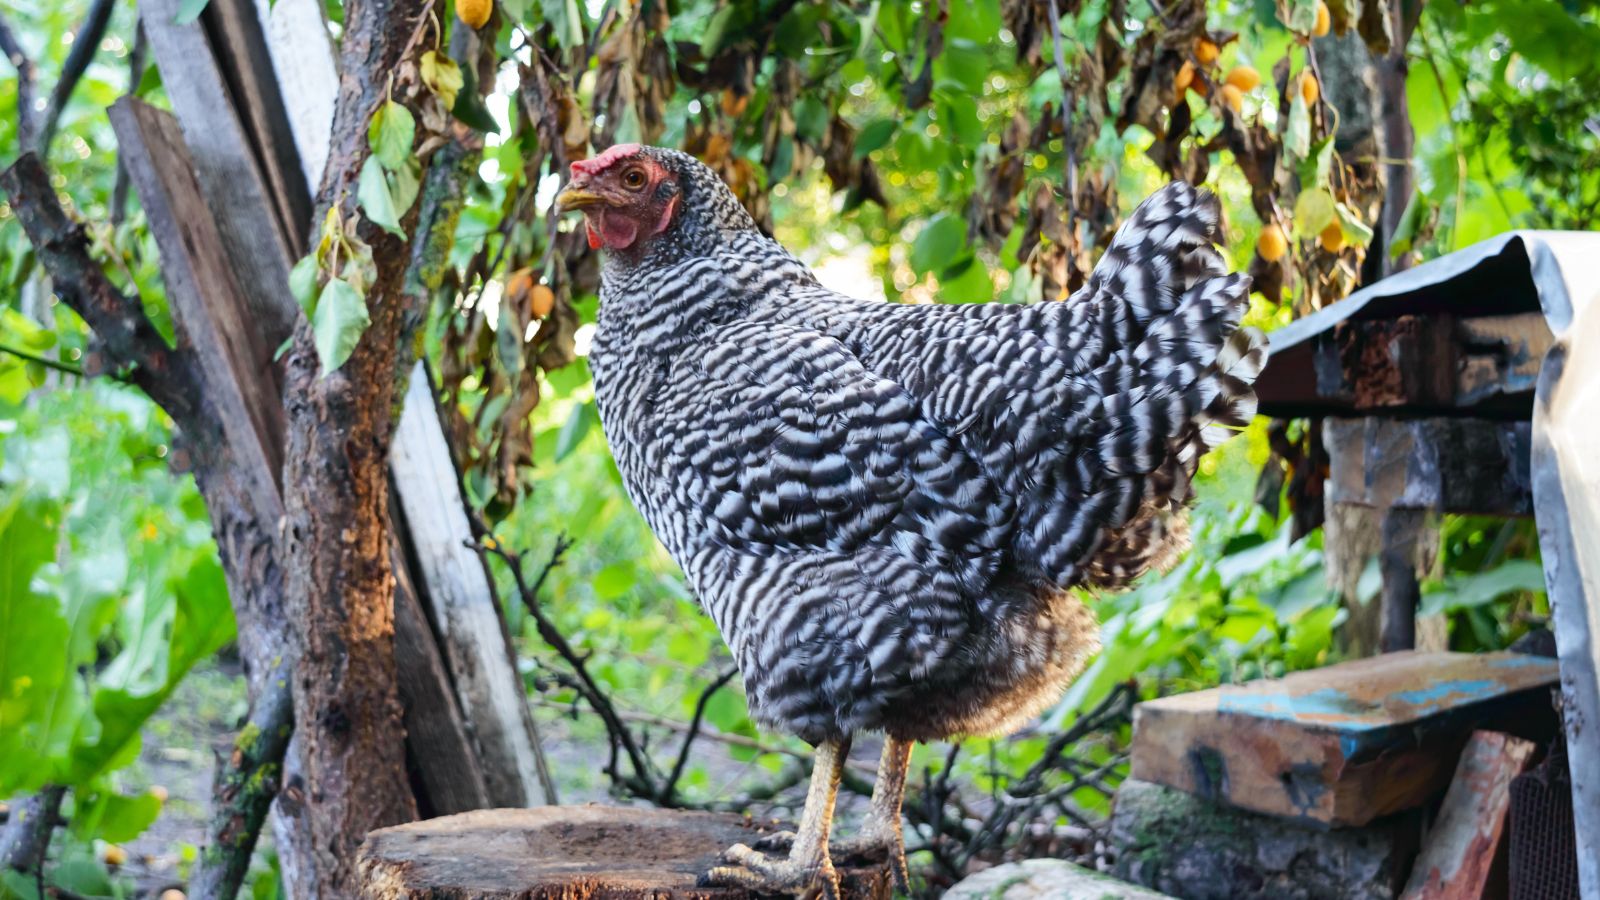 A large motley hen stands on a stump in the garden.